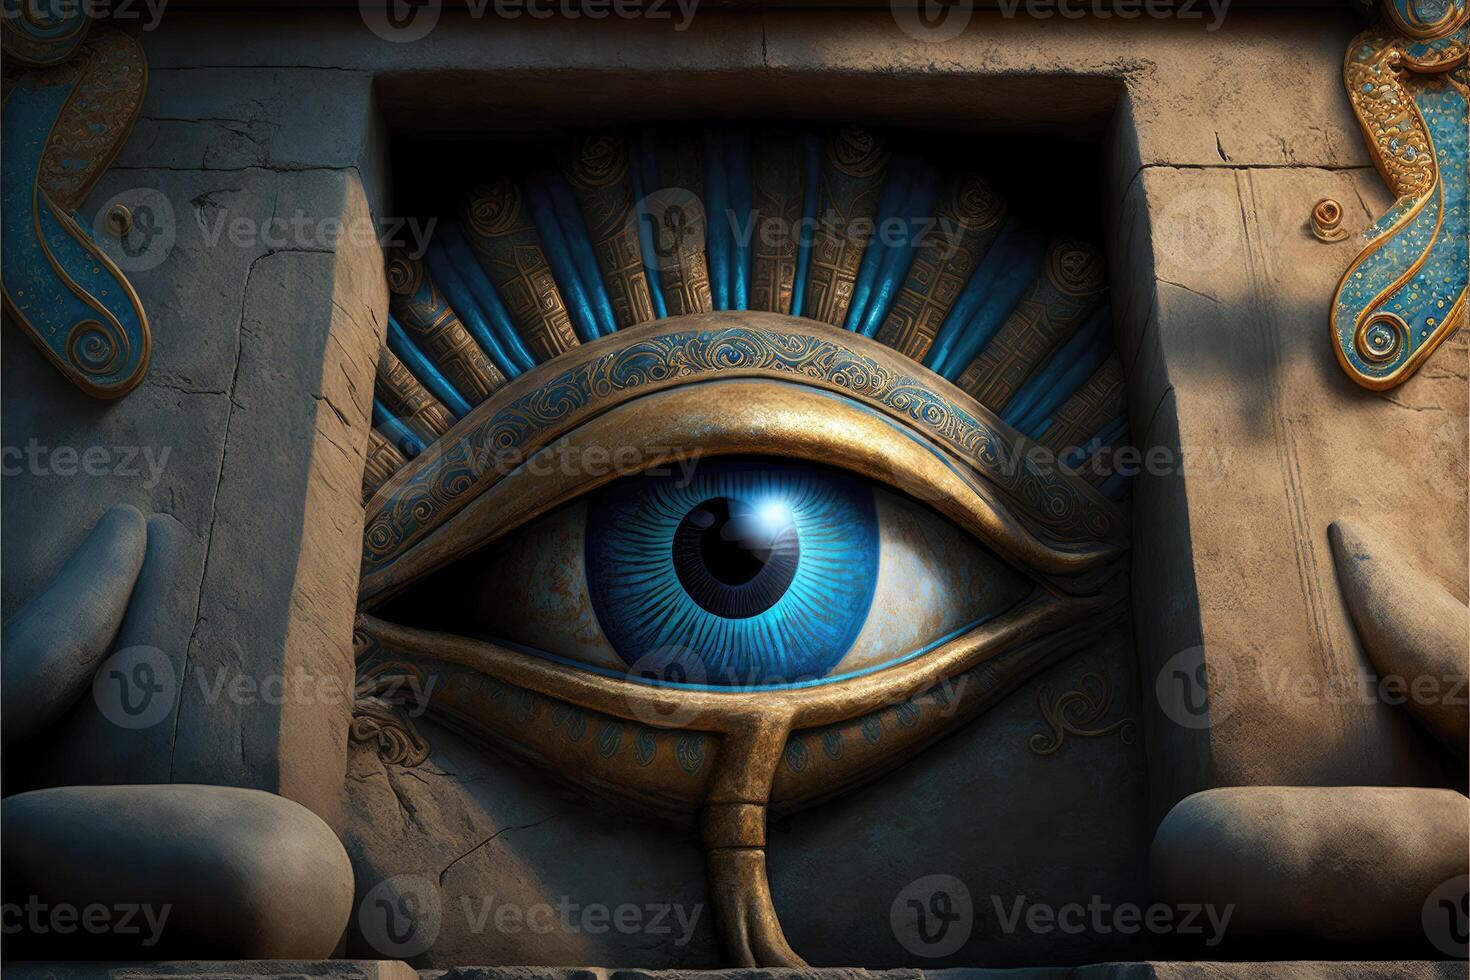 Eye of Horus, wedjat eye or udjat eye at the entrance to the temple of the Pharaohs abstract background. photo